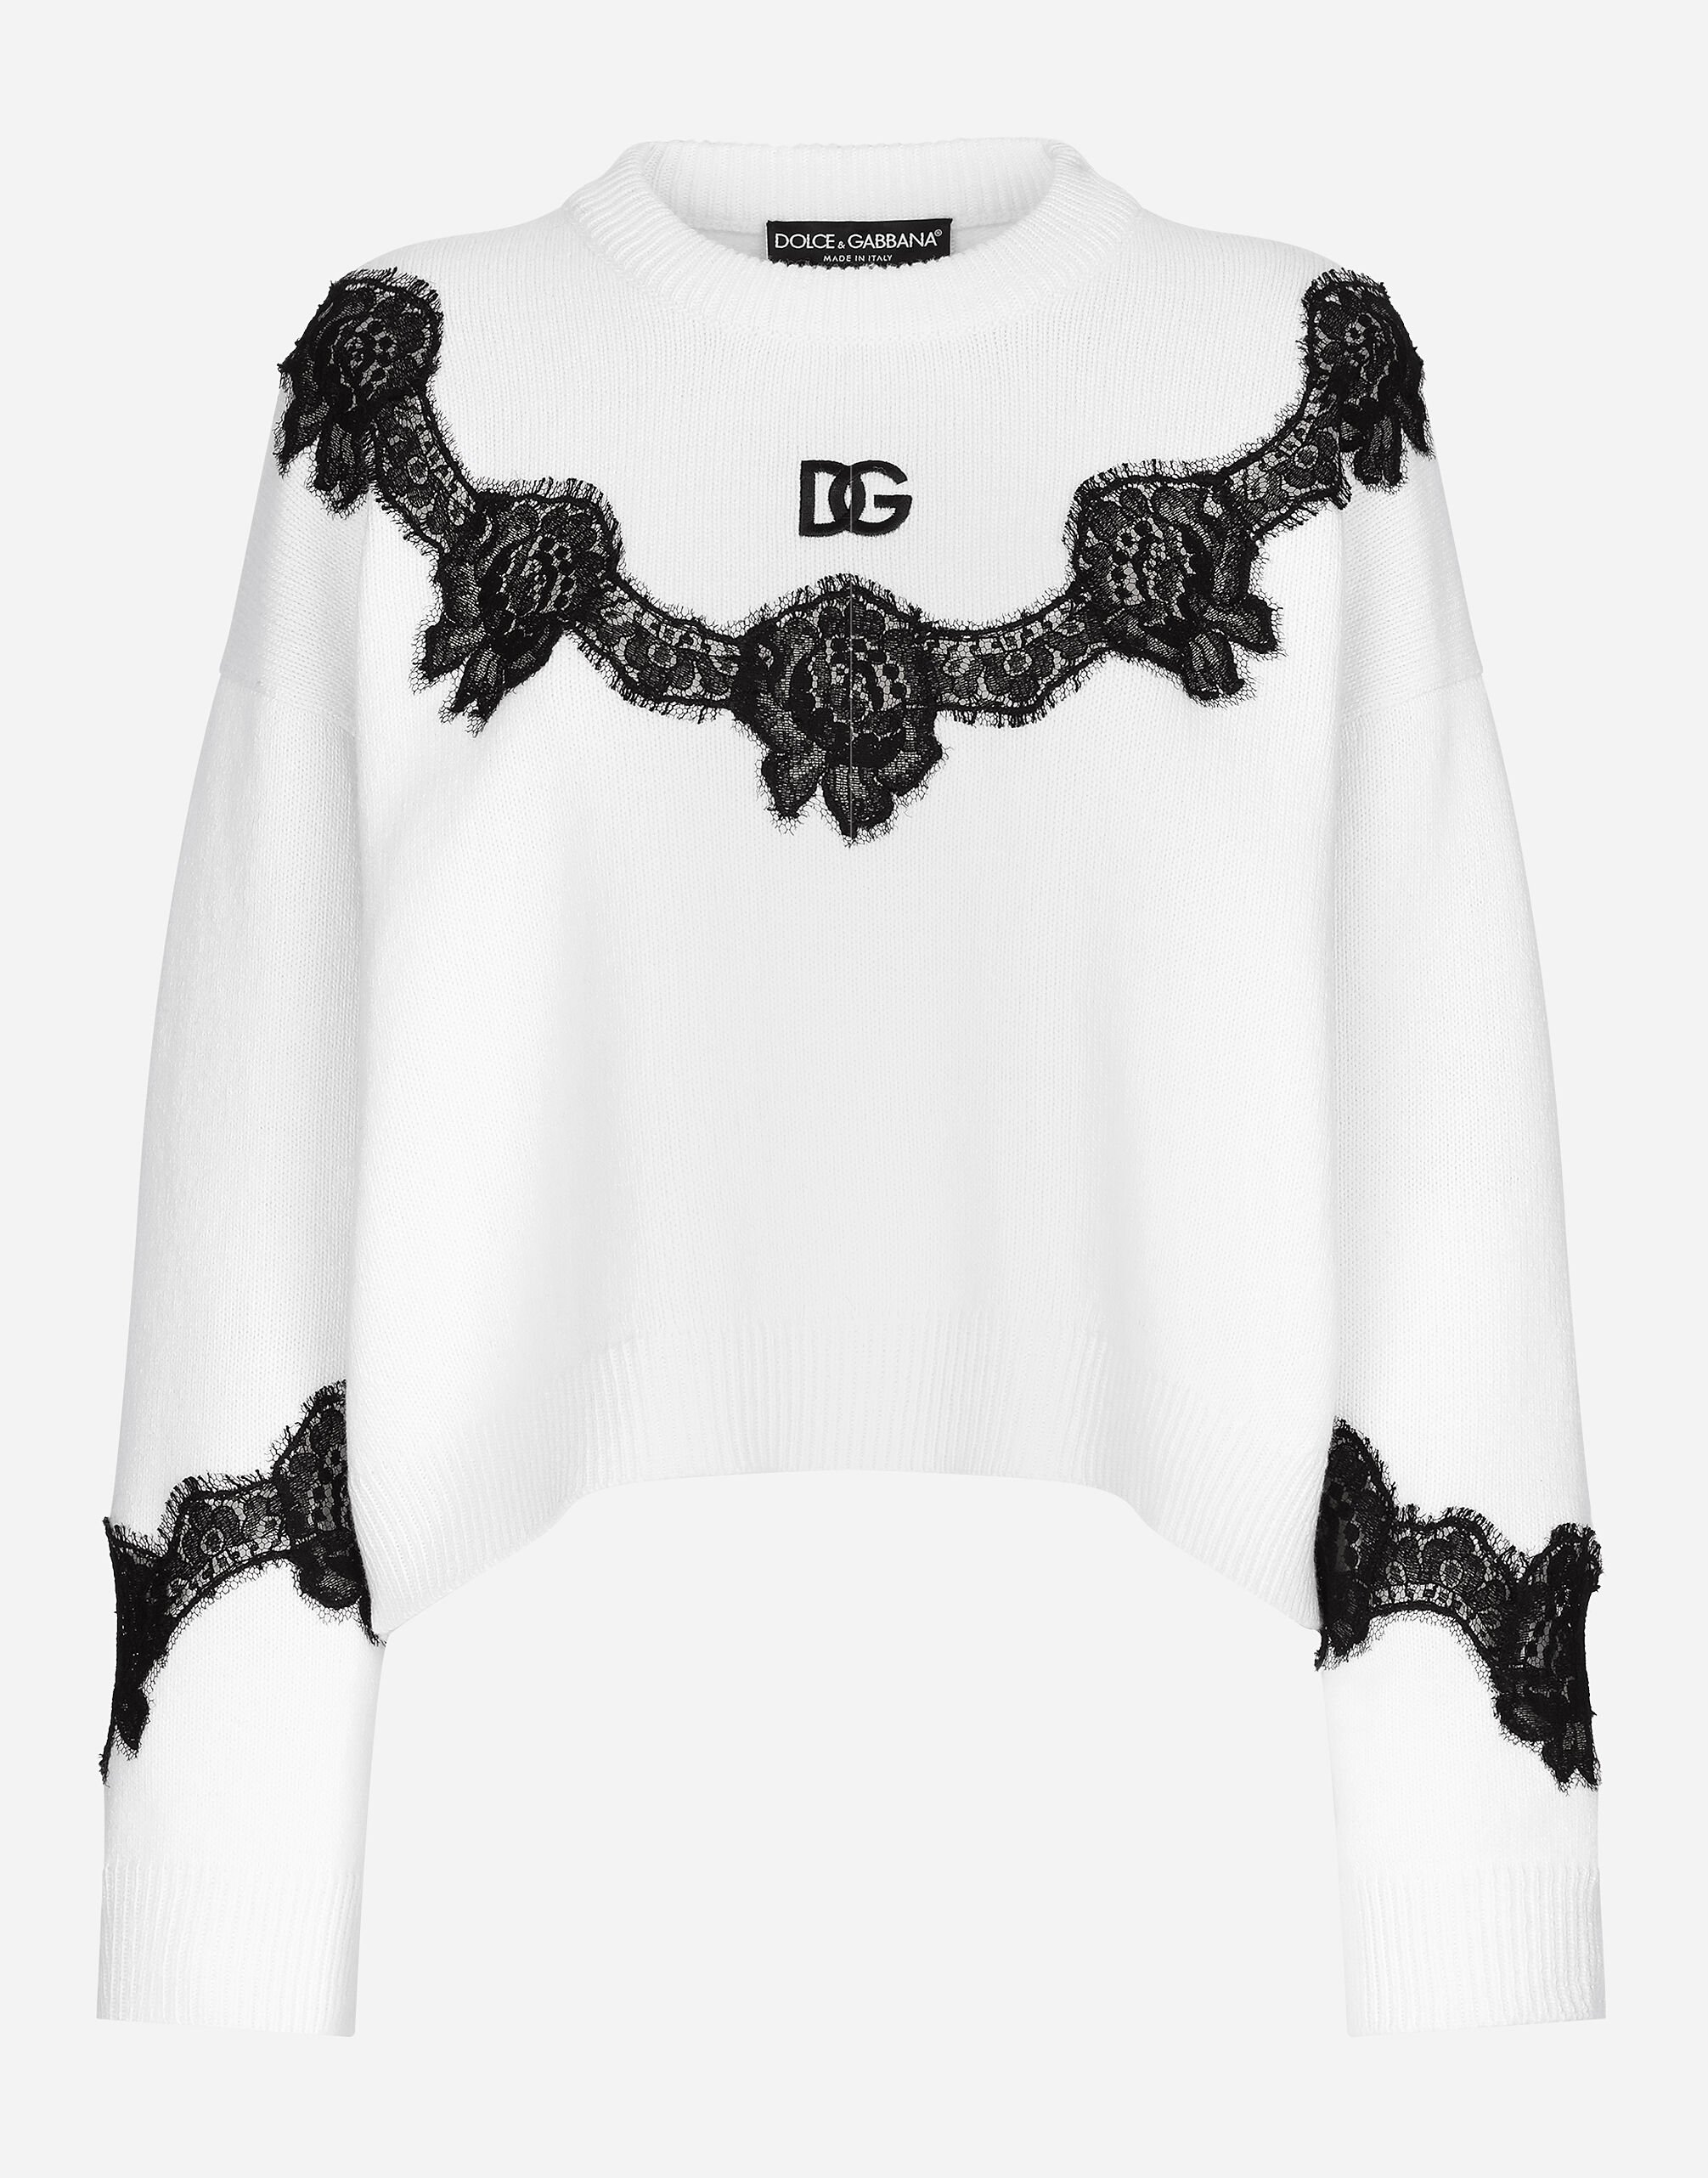 Dolce & Gabbana Wool sweater with DG logo and lace inserts Print FXX06TJCVYK